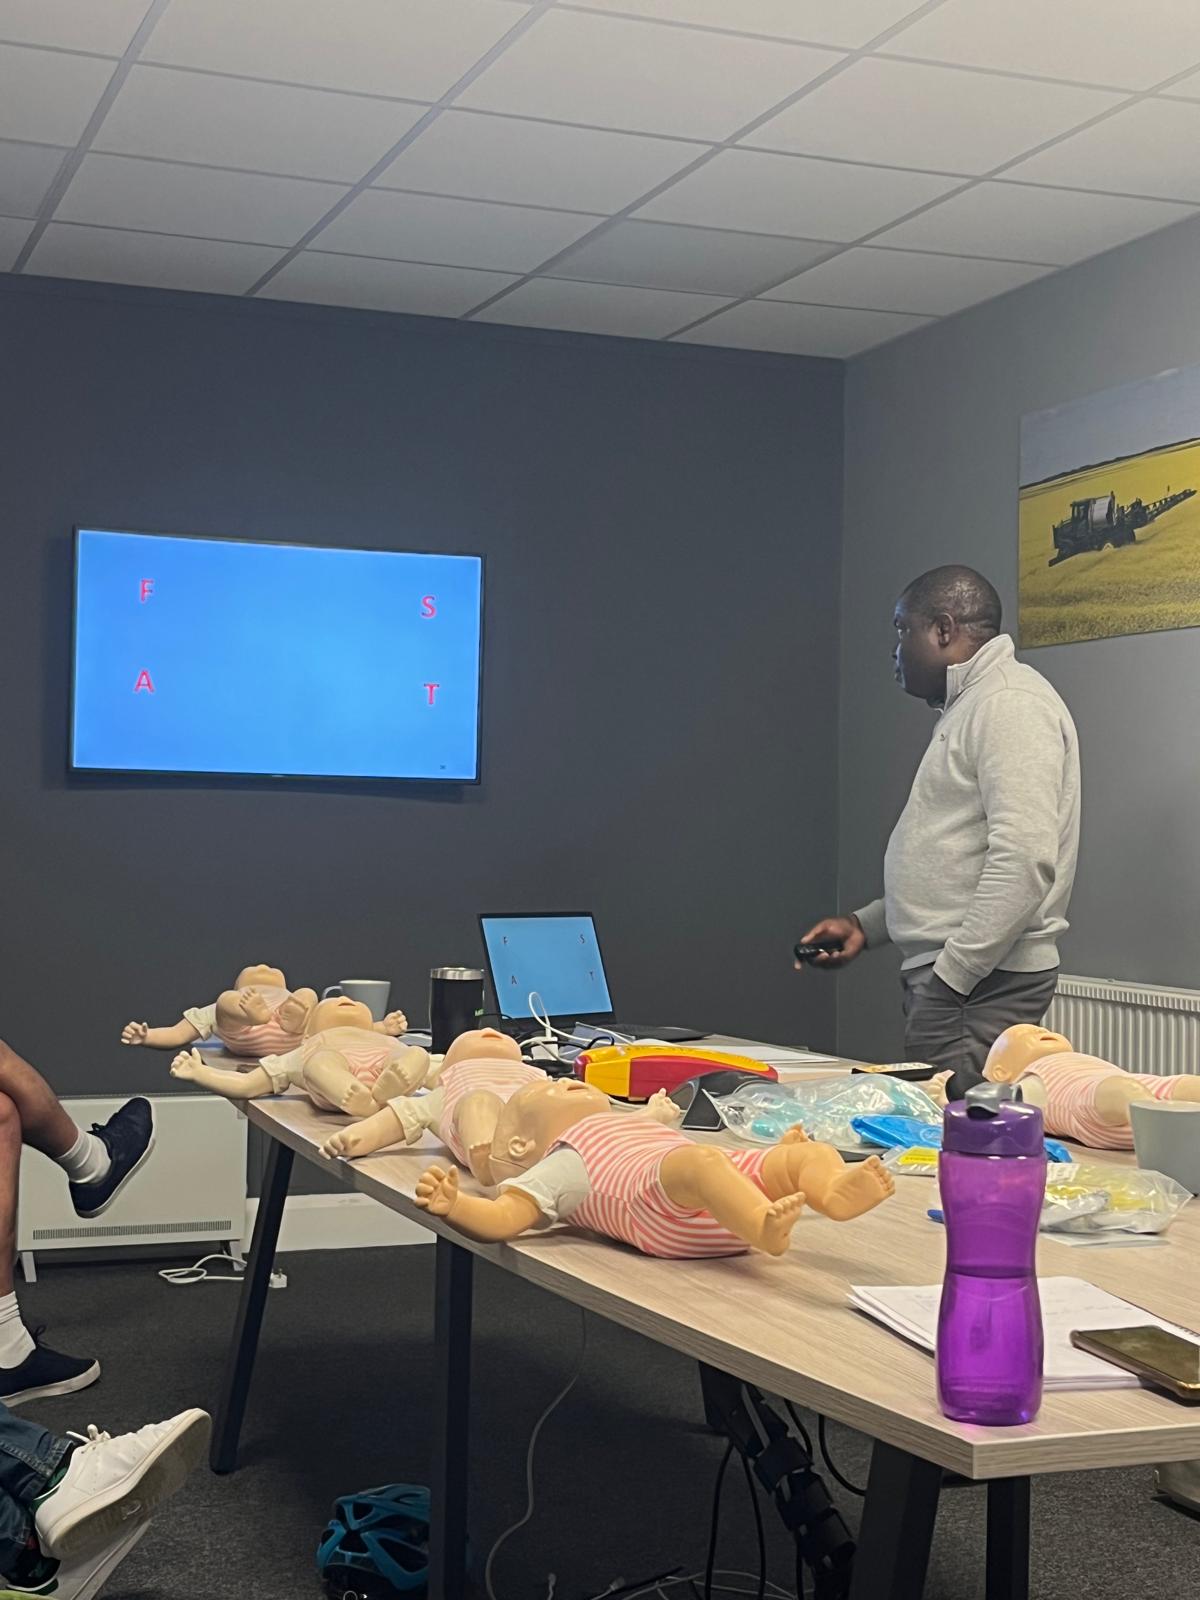 MagrowTec's Dublin based team has completed their First Aid Training